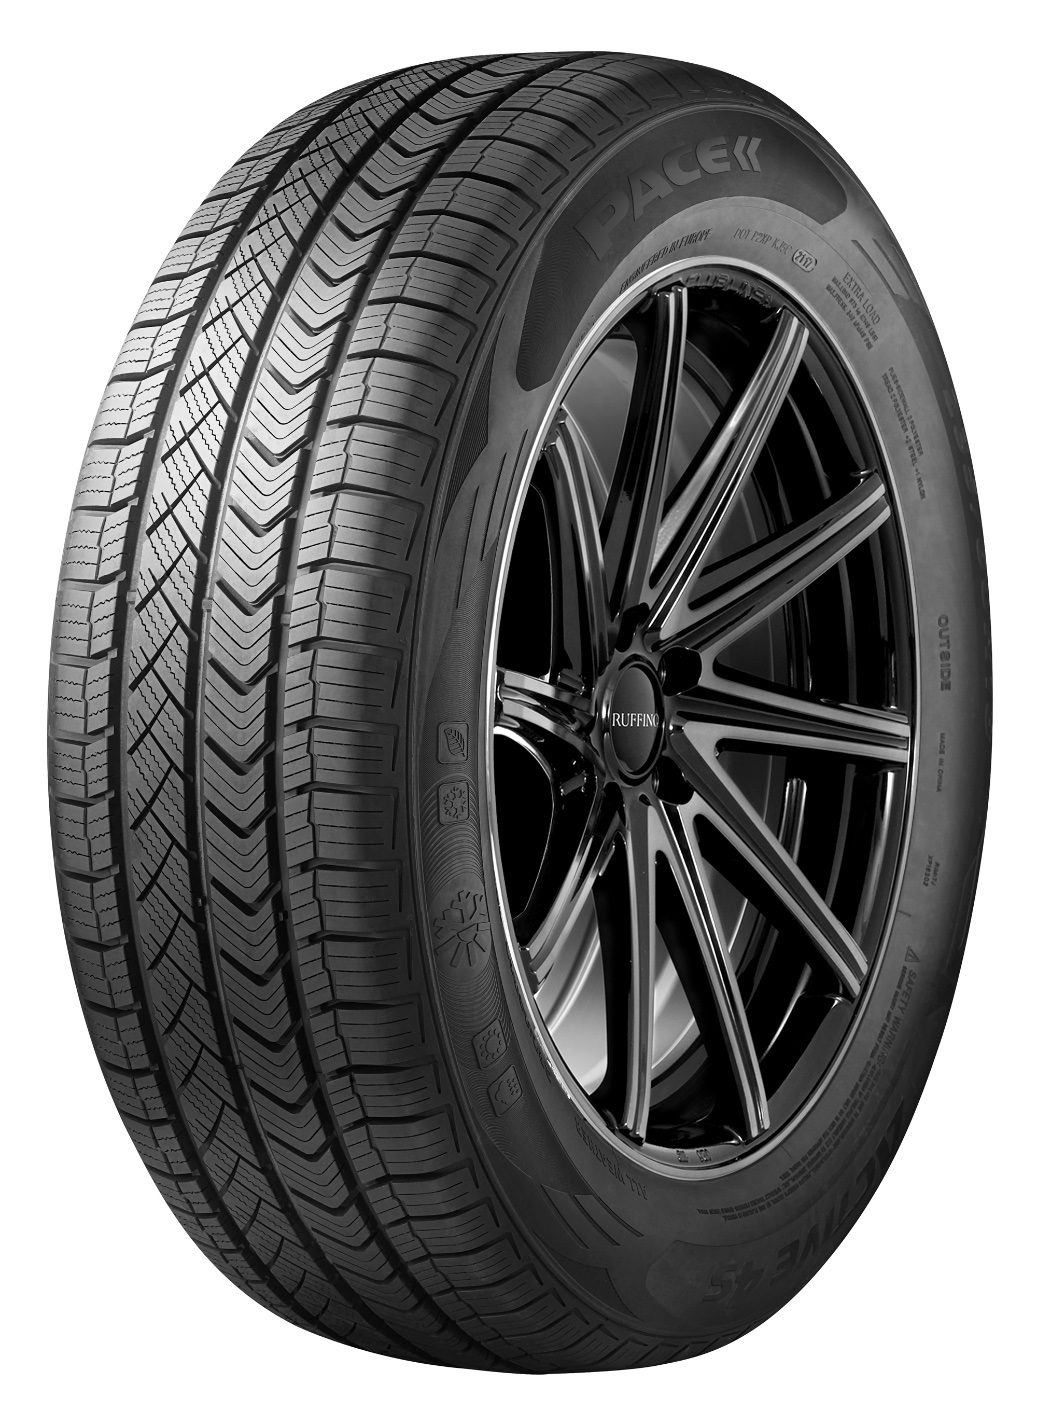 Gomme Nuove Pace 195/60 R15 88H ACTIVE 4S M+S pneumatici nuovi All Season